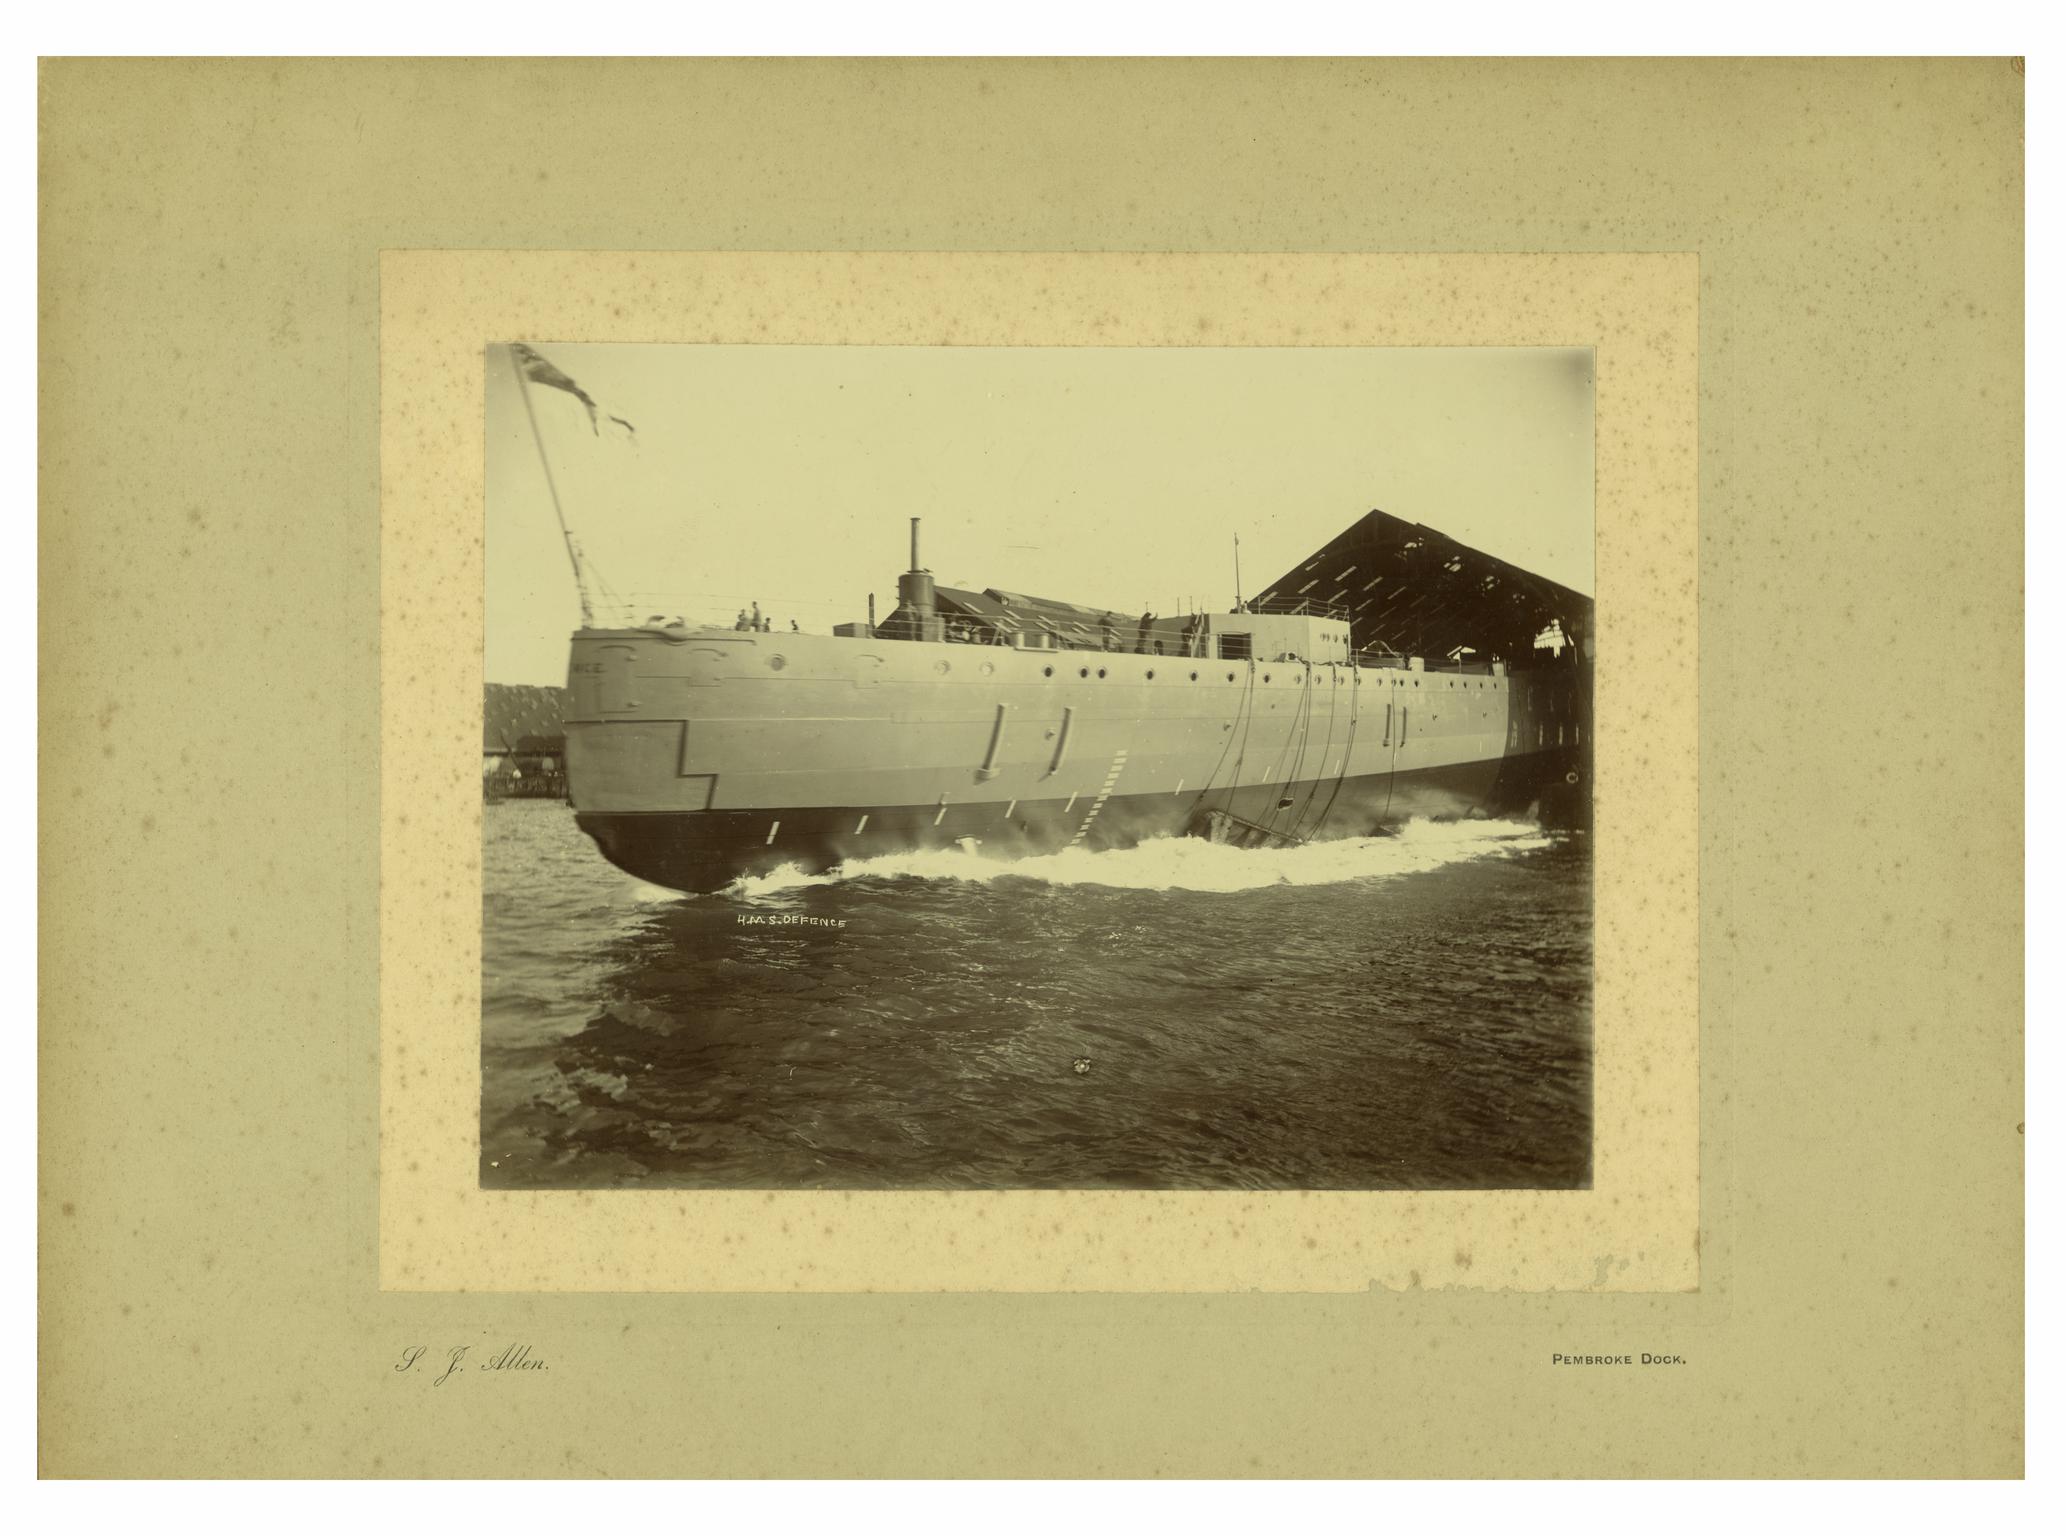 H.M.S. DEFENCE, photograph